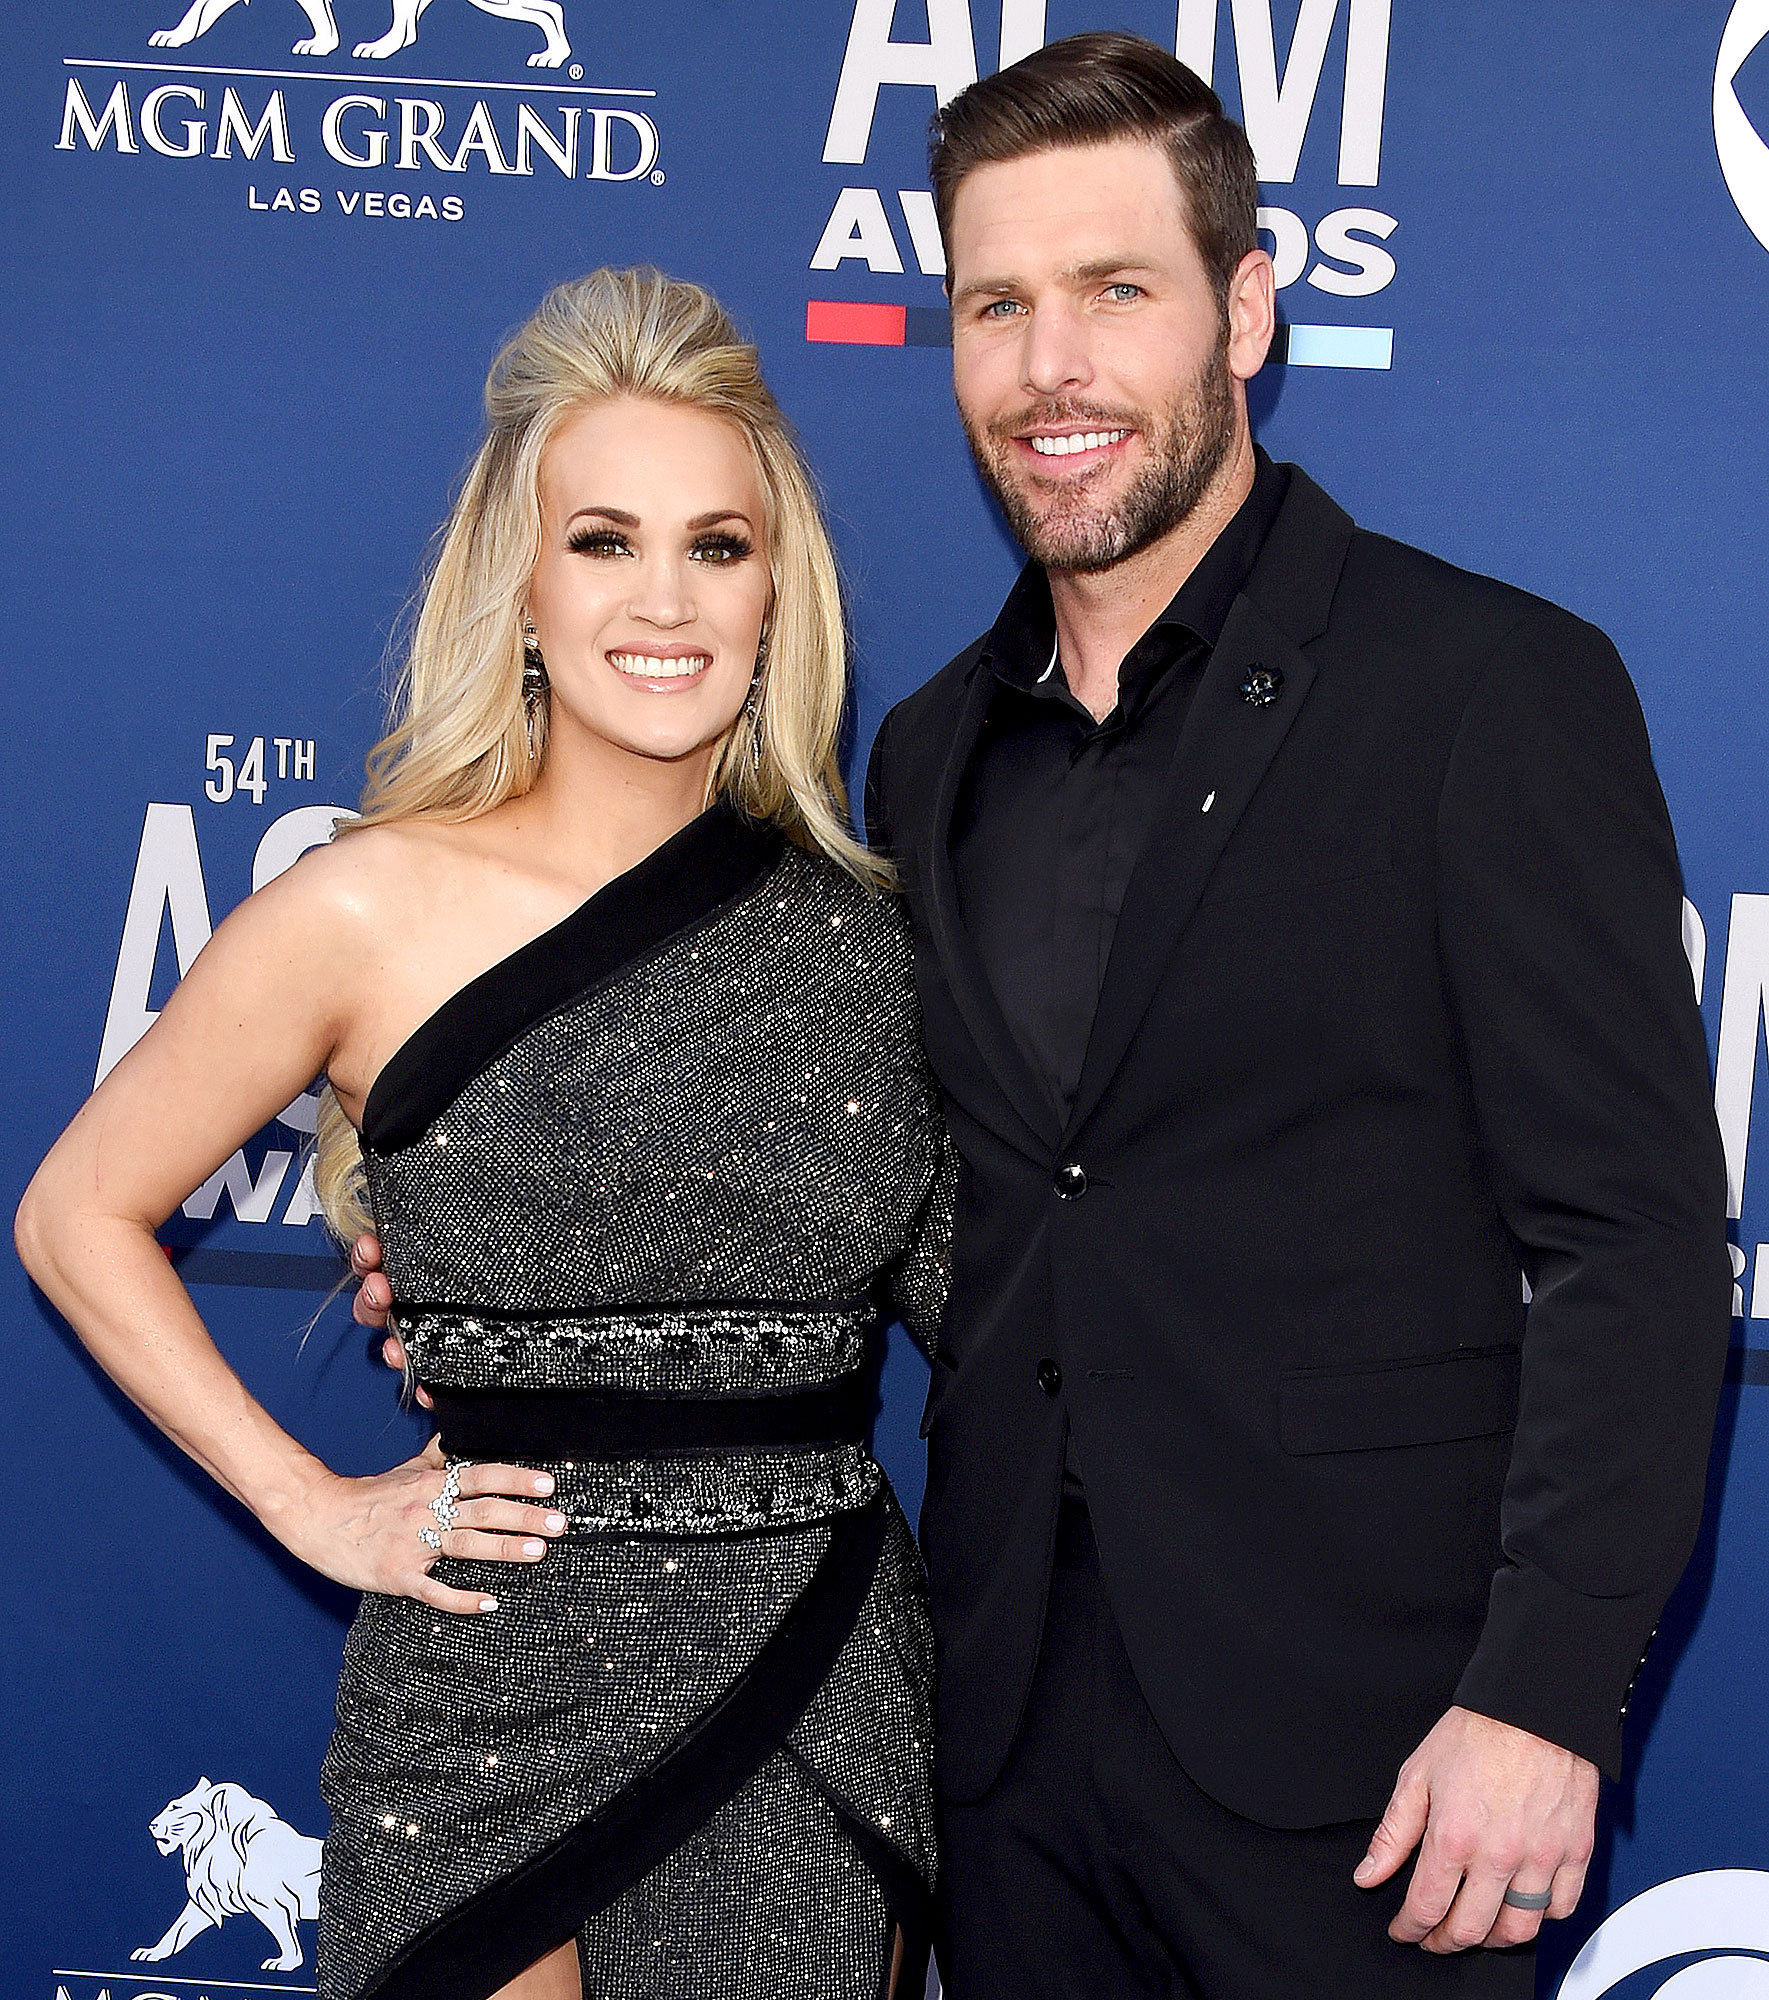 Carrie Underwood Calls Out Husband Over His Collection of Dead Things